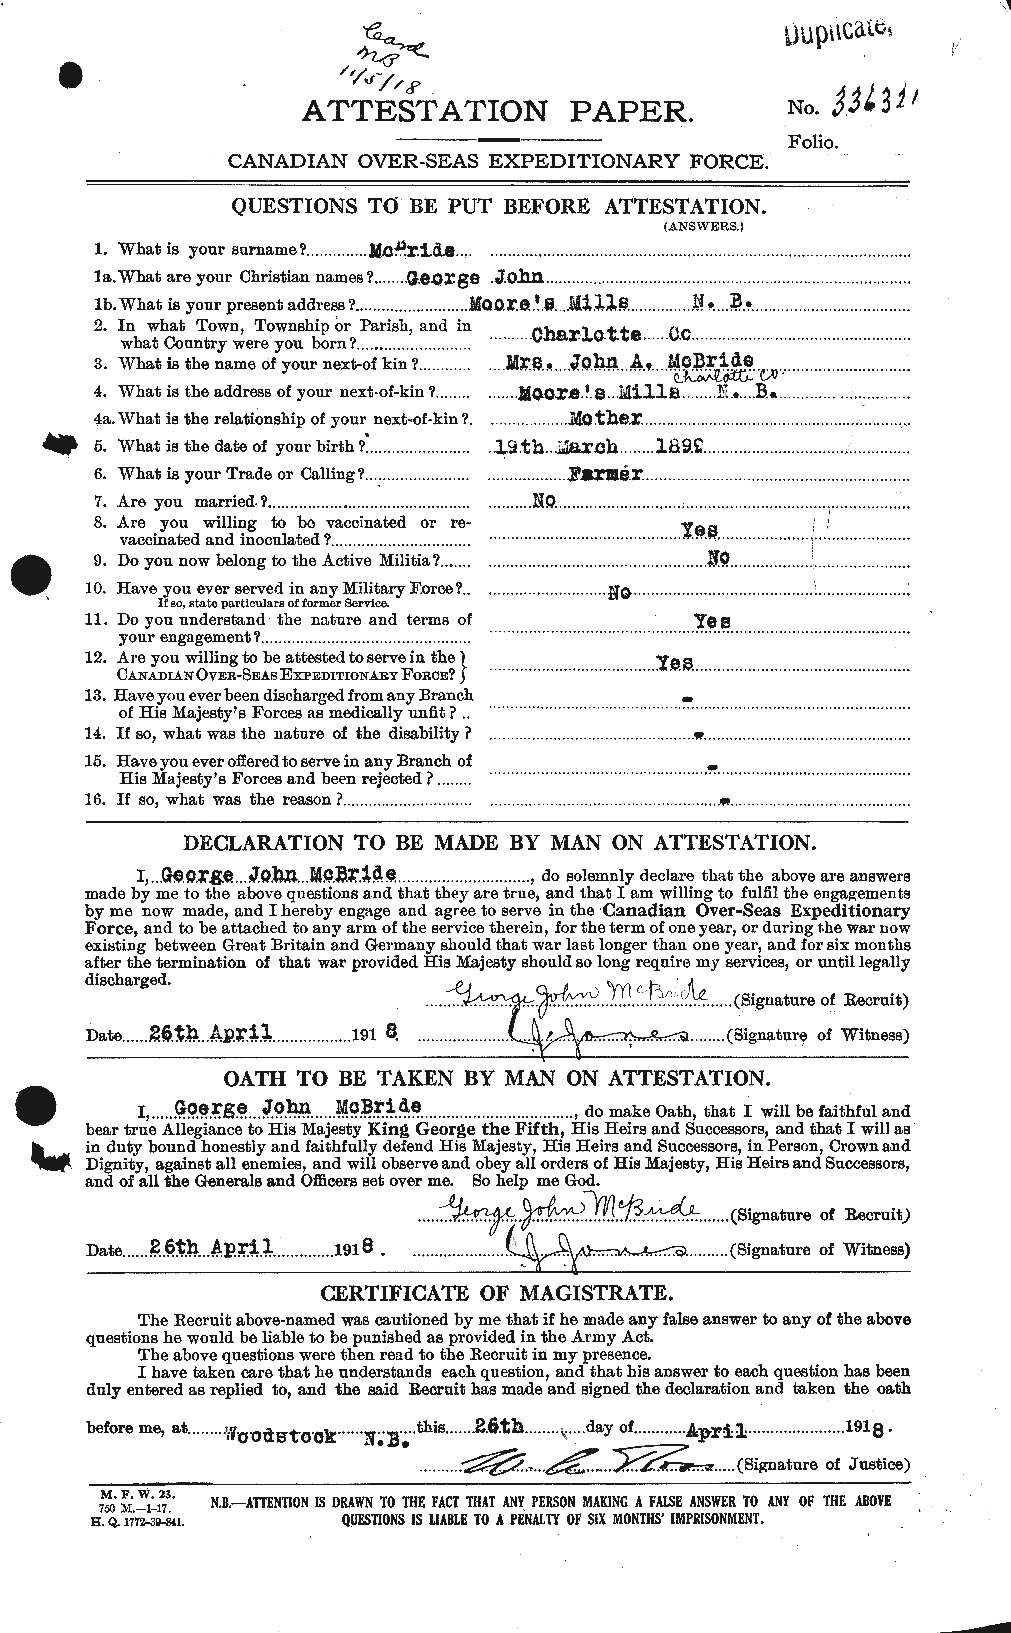 Personnel Records of the First World War - CEF 131939a